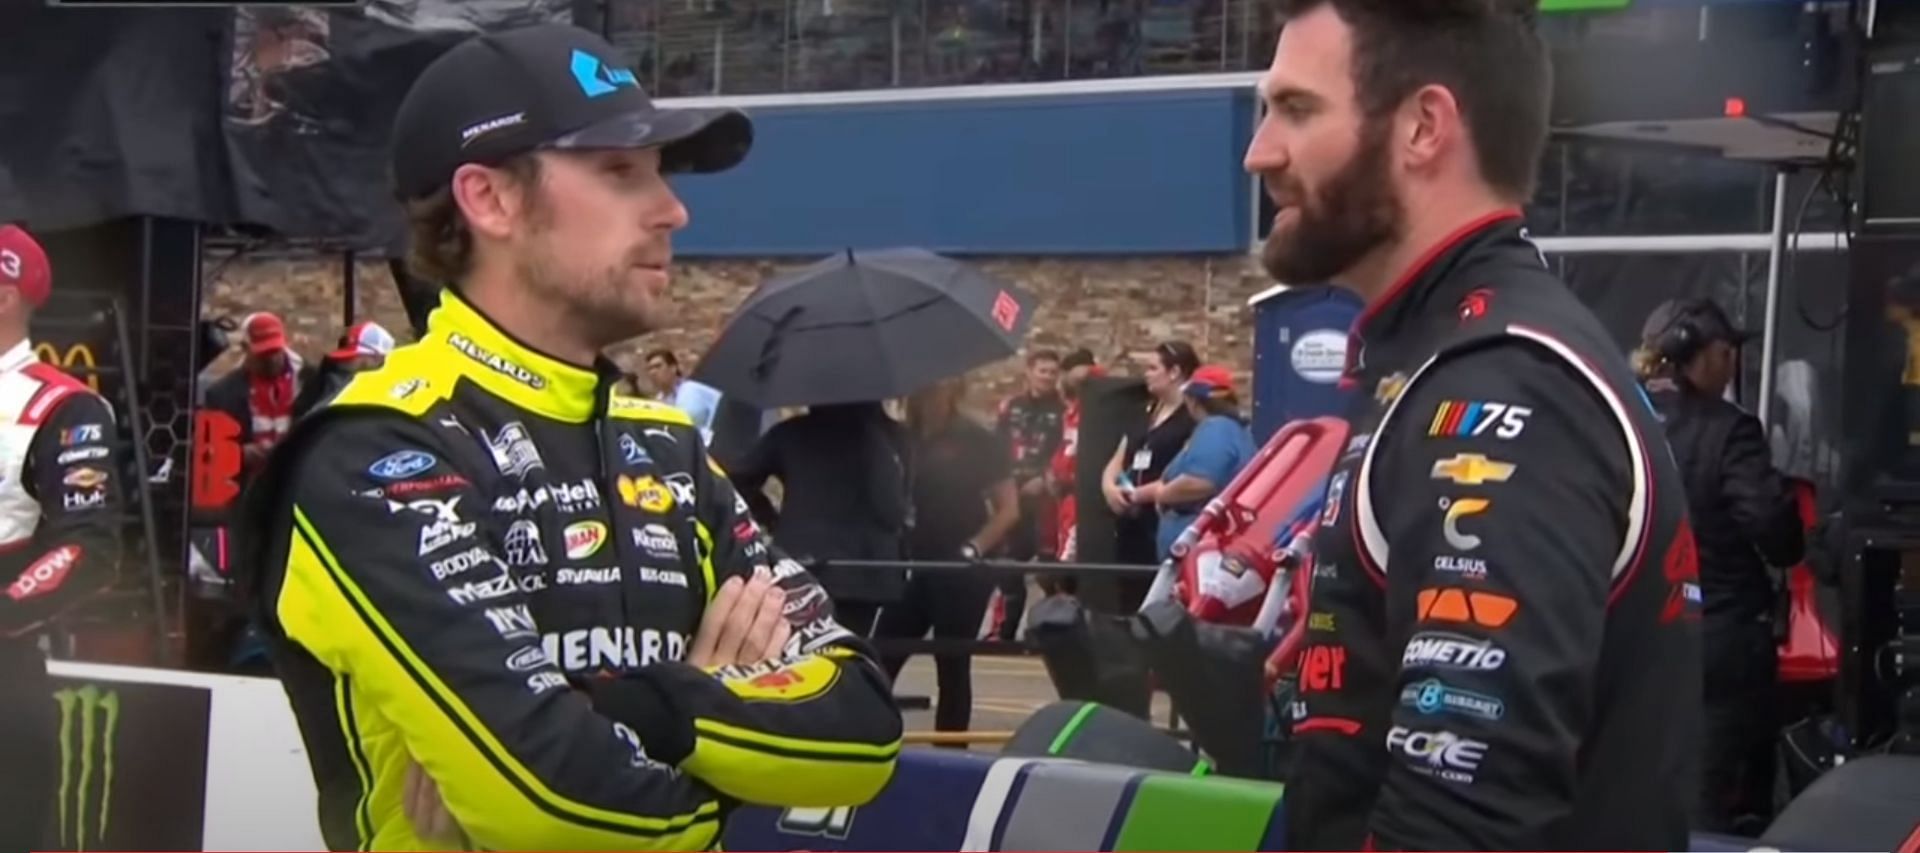 NASCAR Cup Series drivers Ryan Blaney (L) and Corey LaJoie (R) in a conversation during the red flag period during the FireKeepers Casino 400 at Michigan International Speedway. 